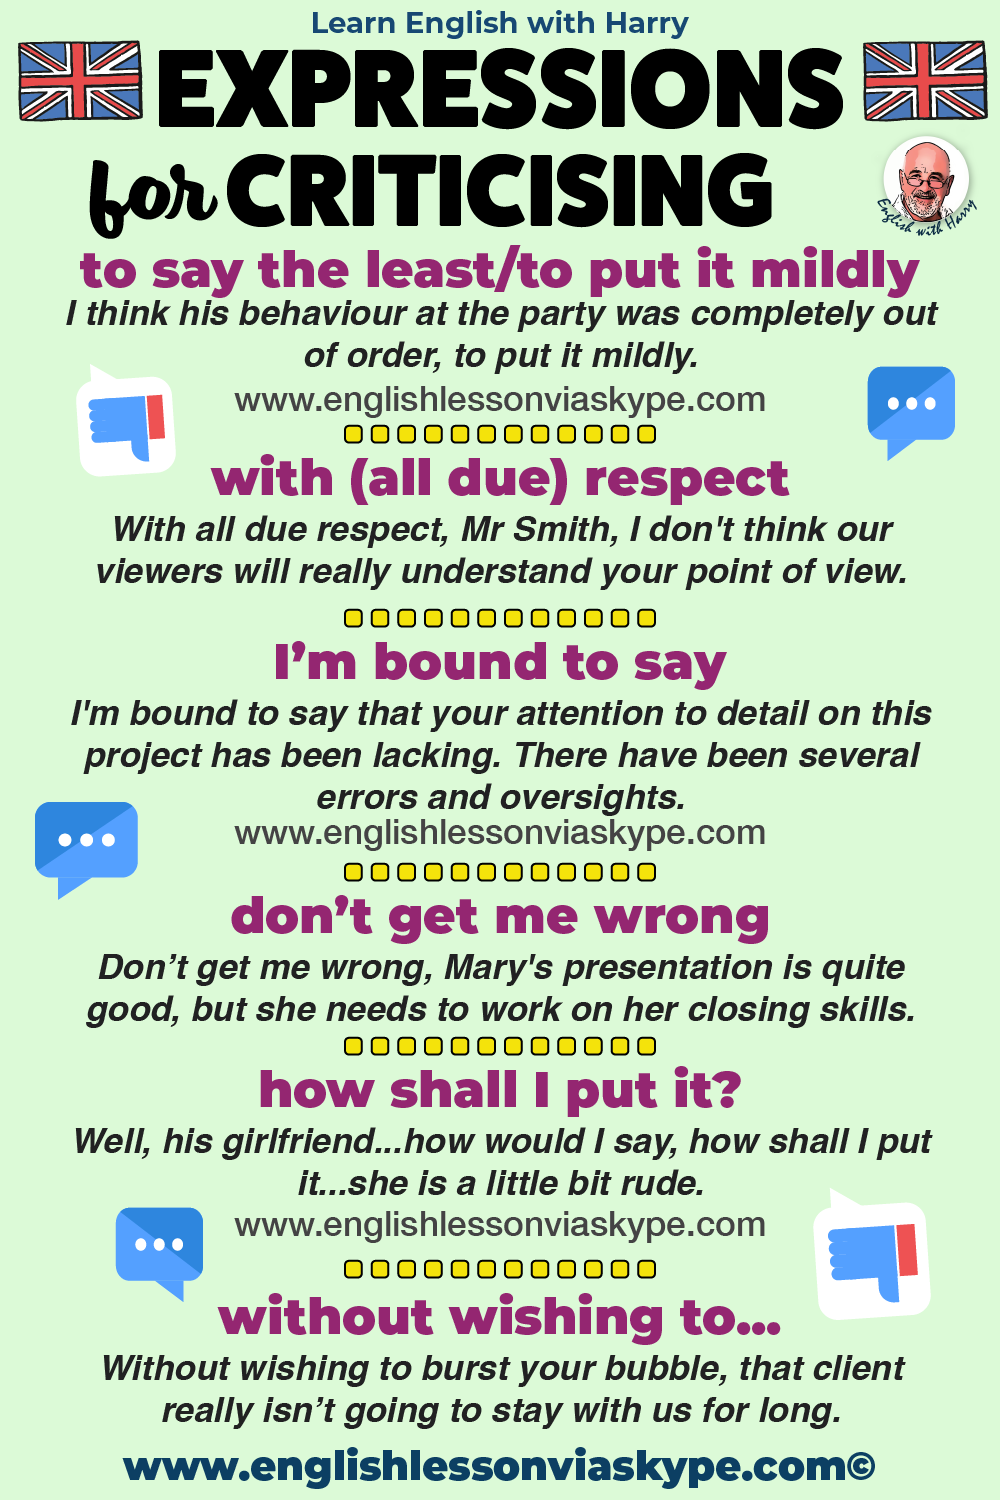 Phrases for criticising in English. English speaking skills. Improve English speaking skills. Upgrade your vocabulary. English grammar rules. Improve English speaking. Advanced English lessons on Zoom and Skype. Improve English speaking and writing skills. #learnenglish